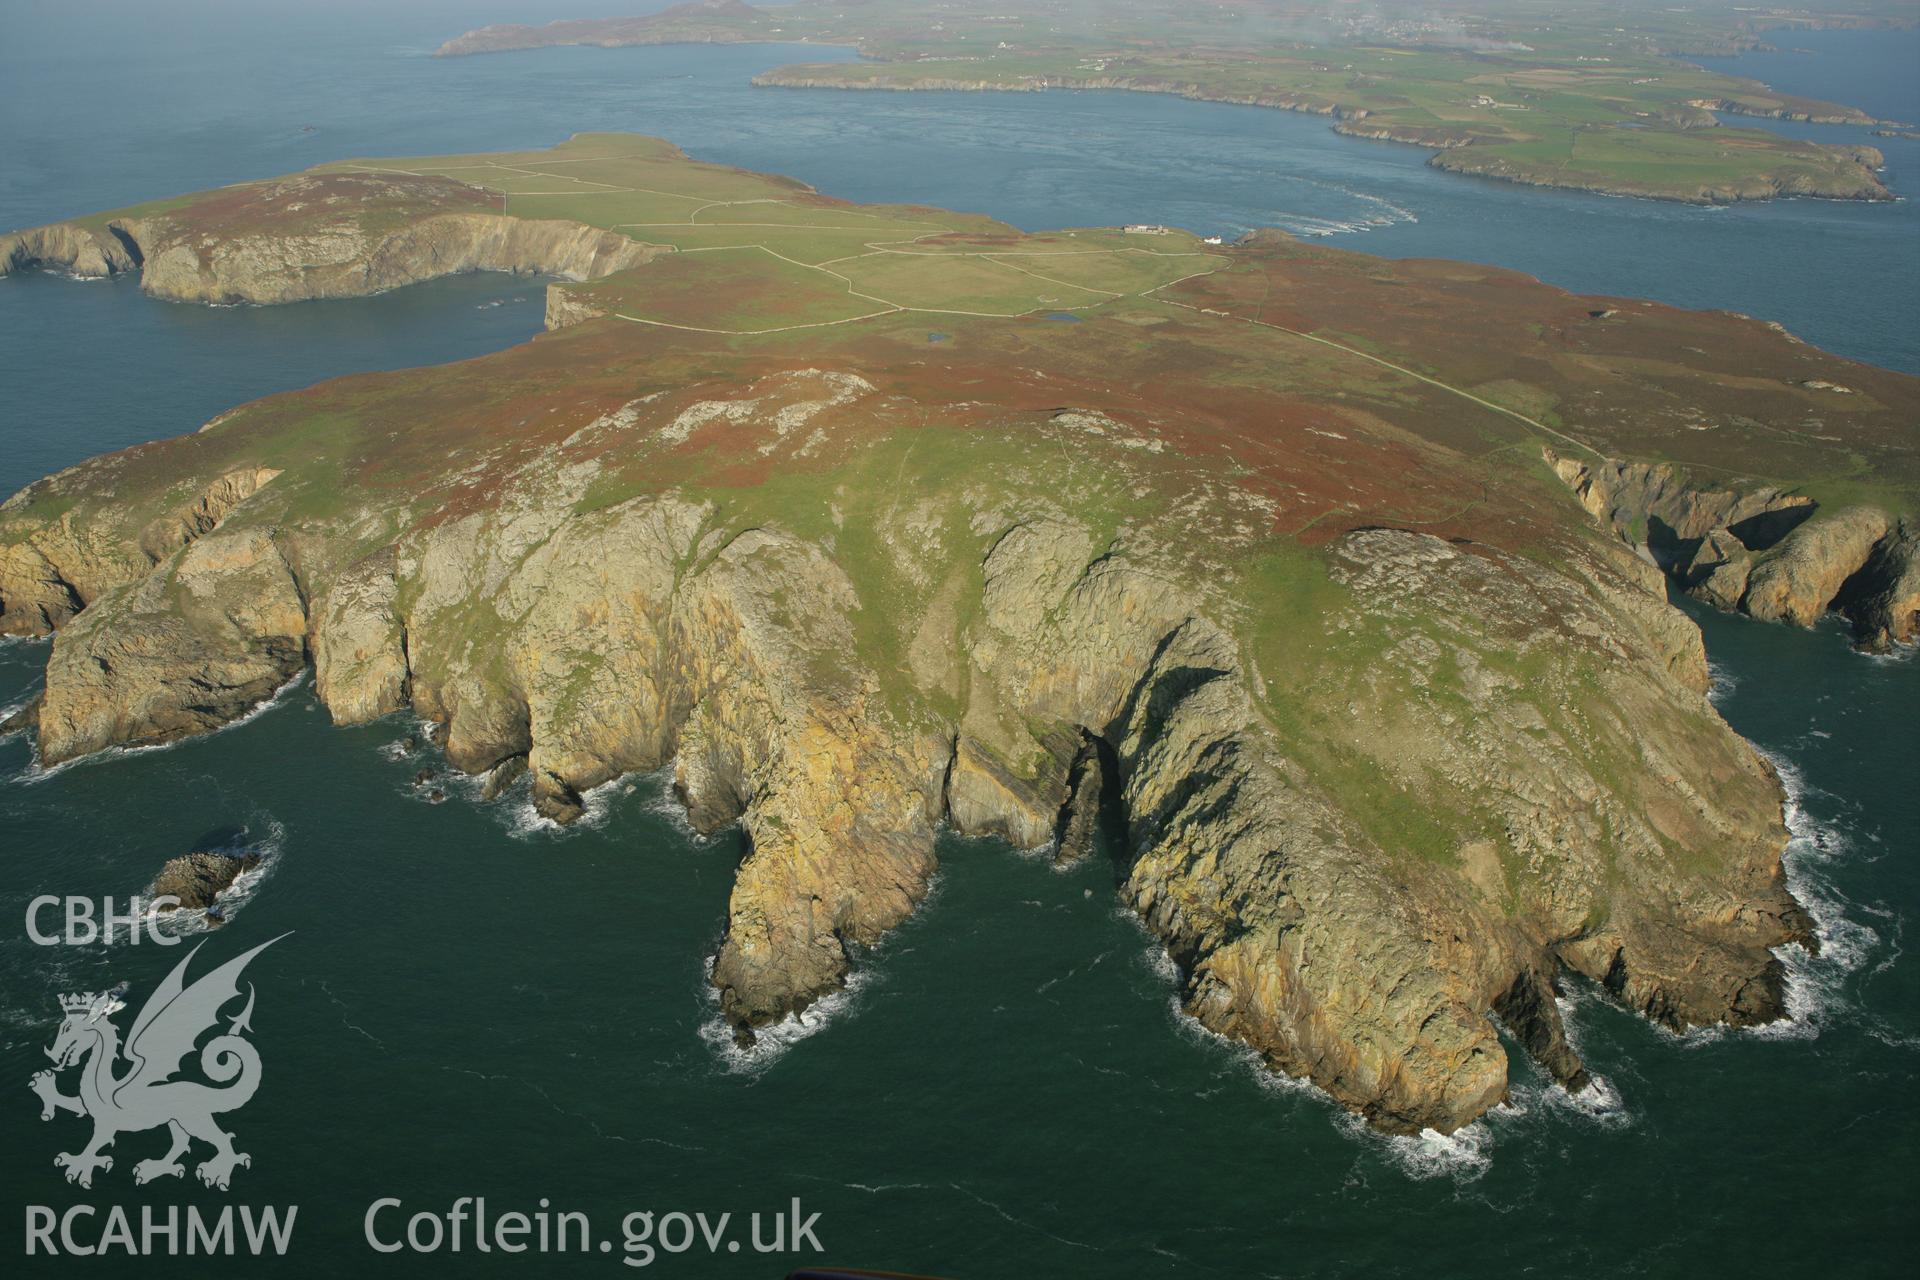 RCAHMW colour oblique photograph of Ramsey island, western coast, looking North East to mainland. Taken by Toby Driver on 23/10/2007.